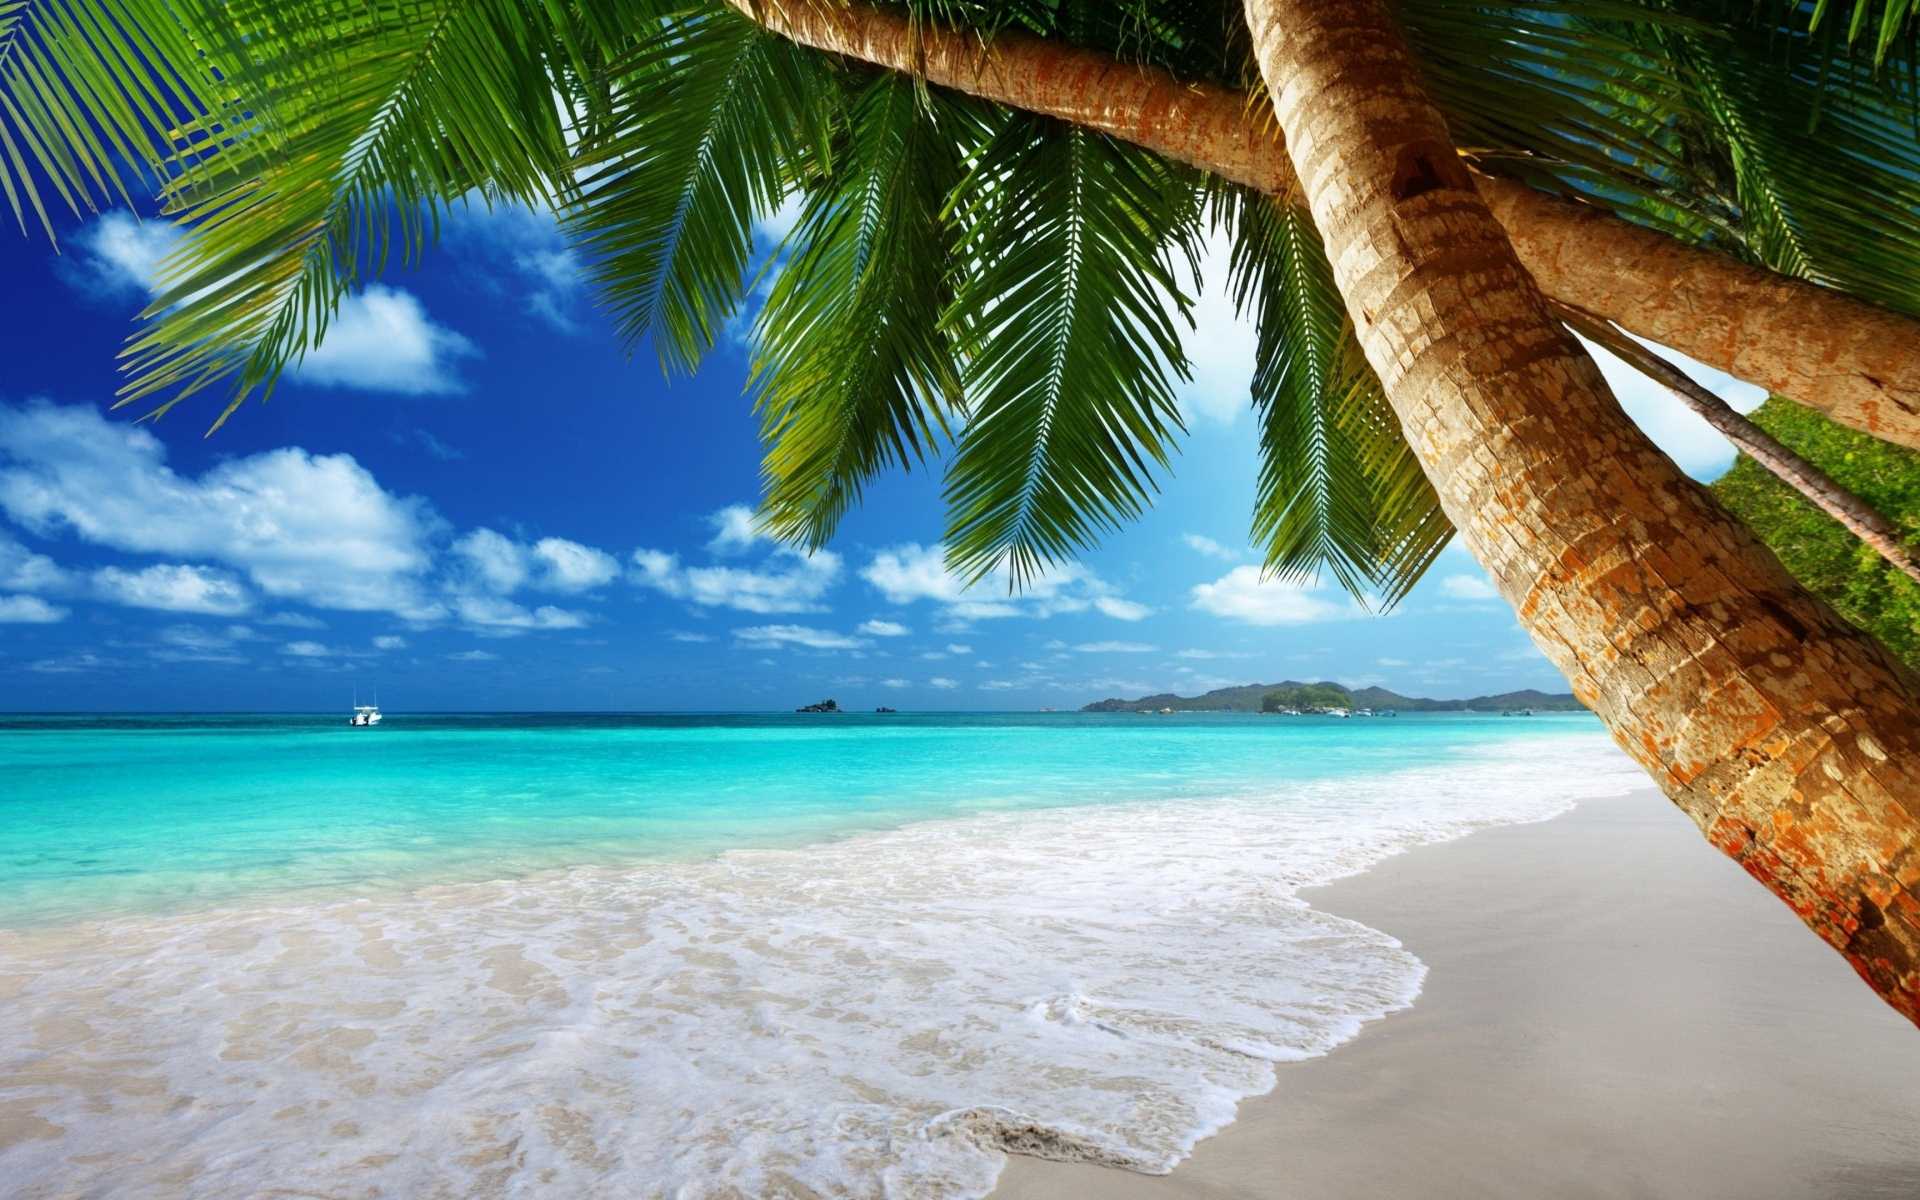 A tropical beach with palm trees, white sand, and crystal clear water. - Beach